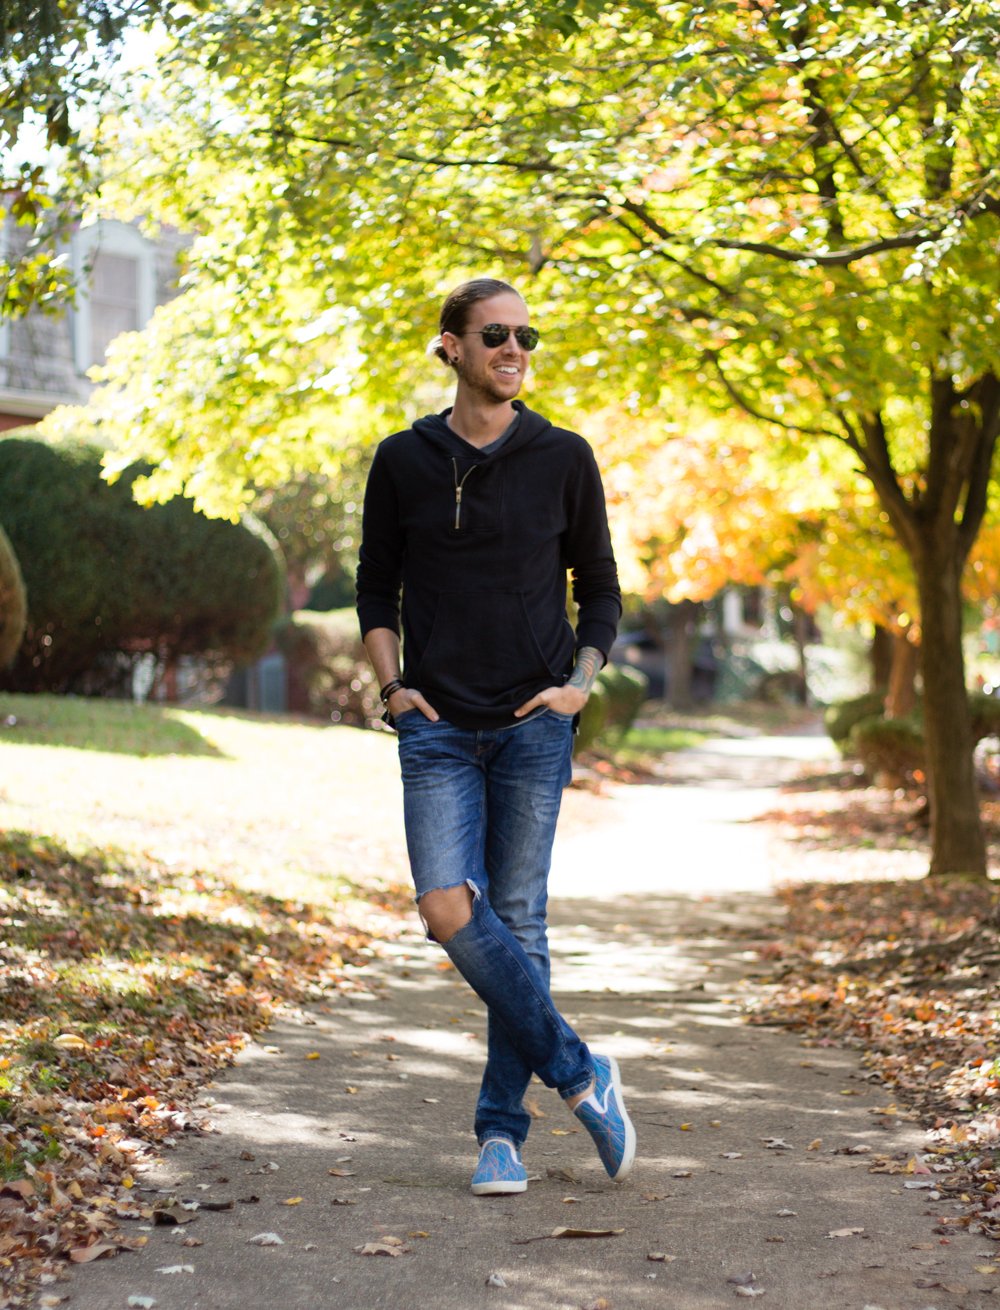 The Kentucky Gent, a men's fashion and lifestyle blogger, in a Kill City Hoodie, Narrows Tank Top, Zara Jeans, Bucketfeet Slip On Shoes, Ray-Ban Aviator Sunglasses, and Miansai wrap bracelet.